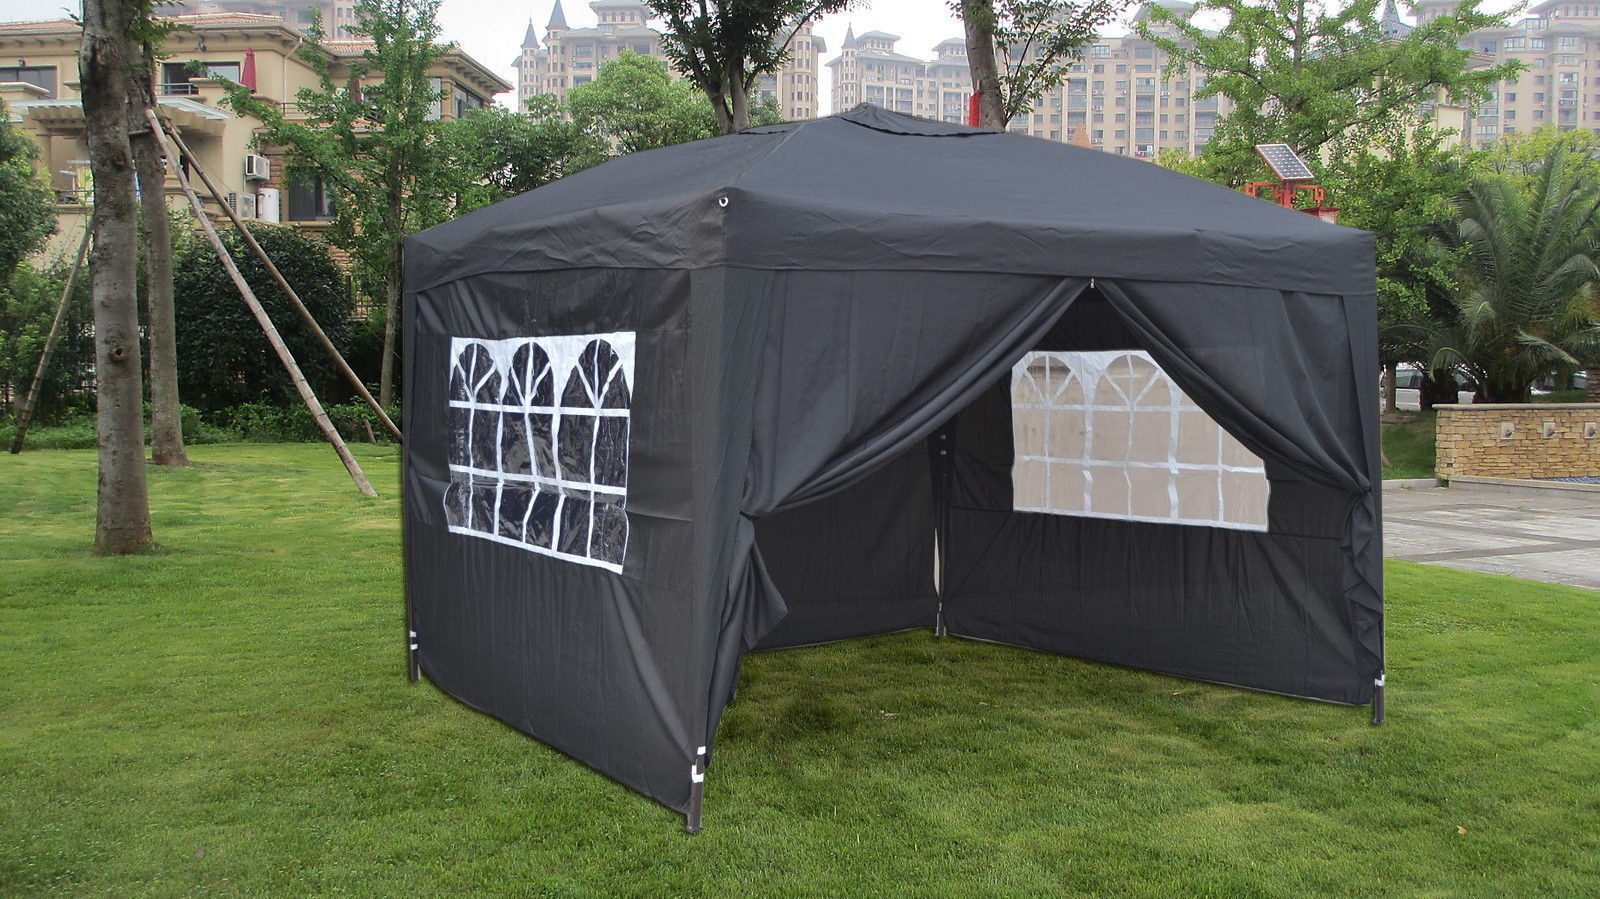 MCombo 10x10 EZ POP UP 4 WALLS CANOPY PARTY TENT GAZEBO WITH SIDES 6051-1010 | eBay